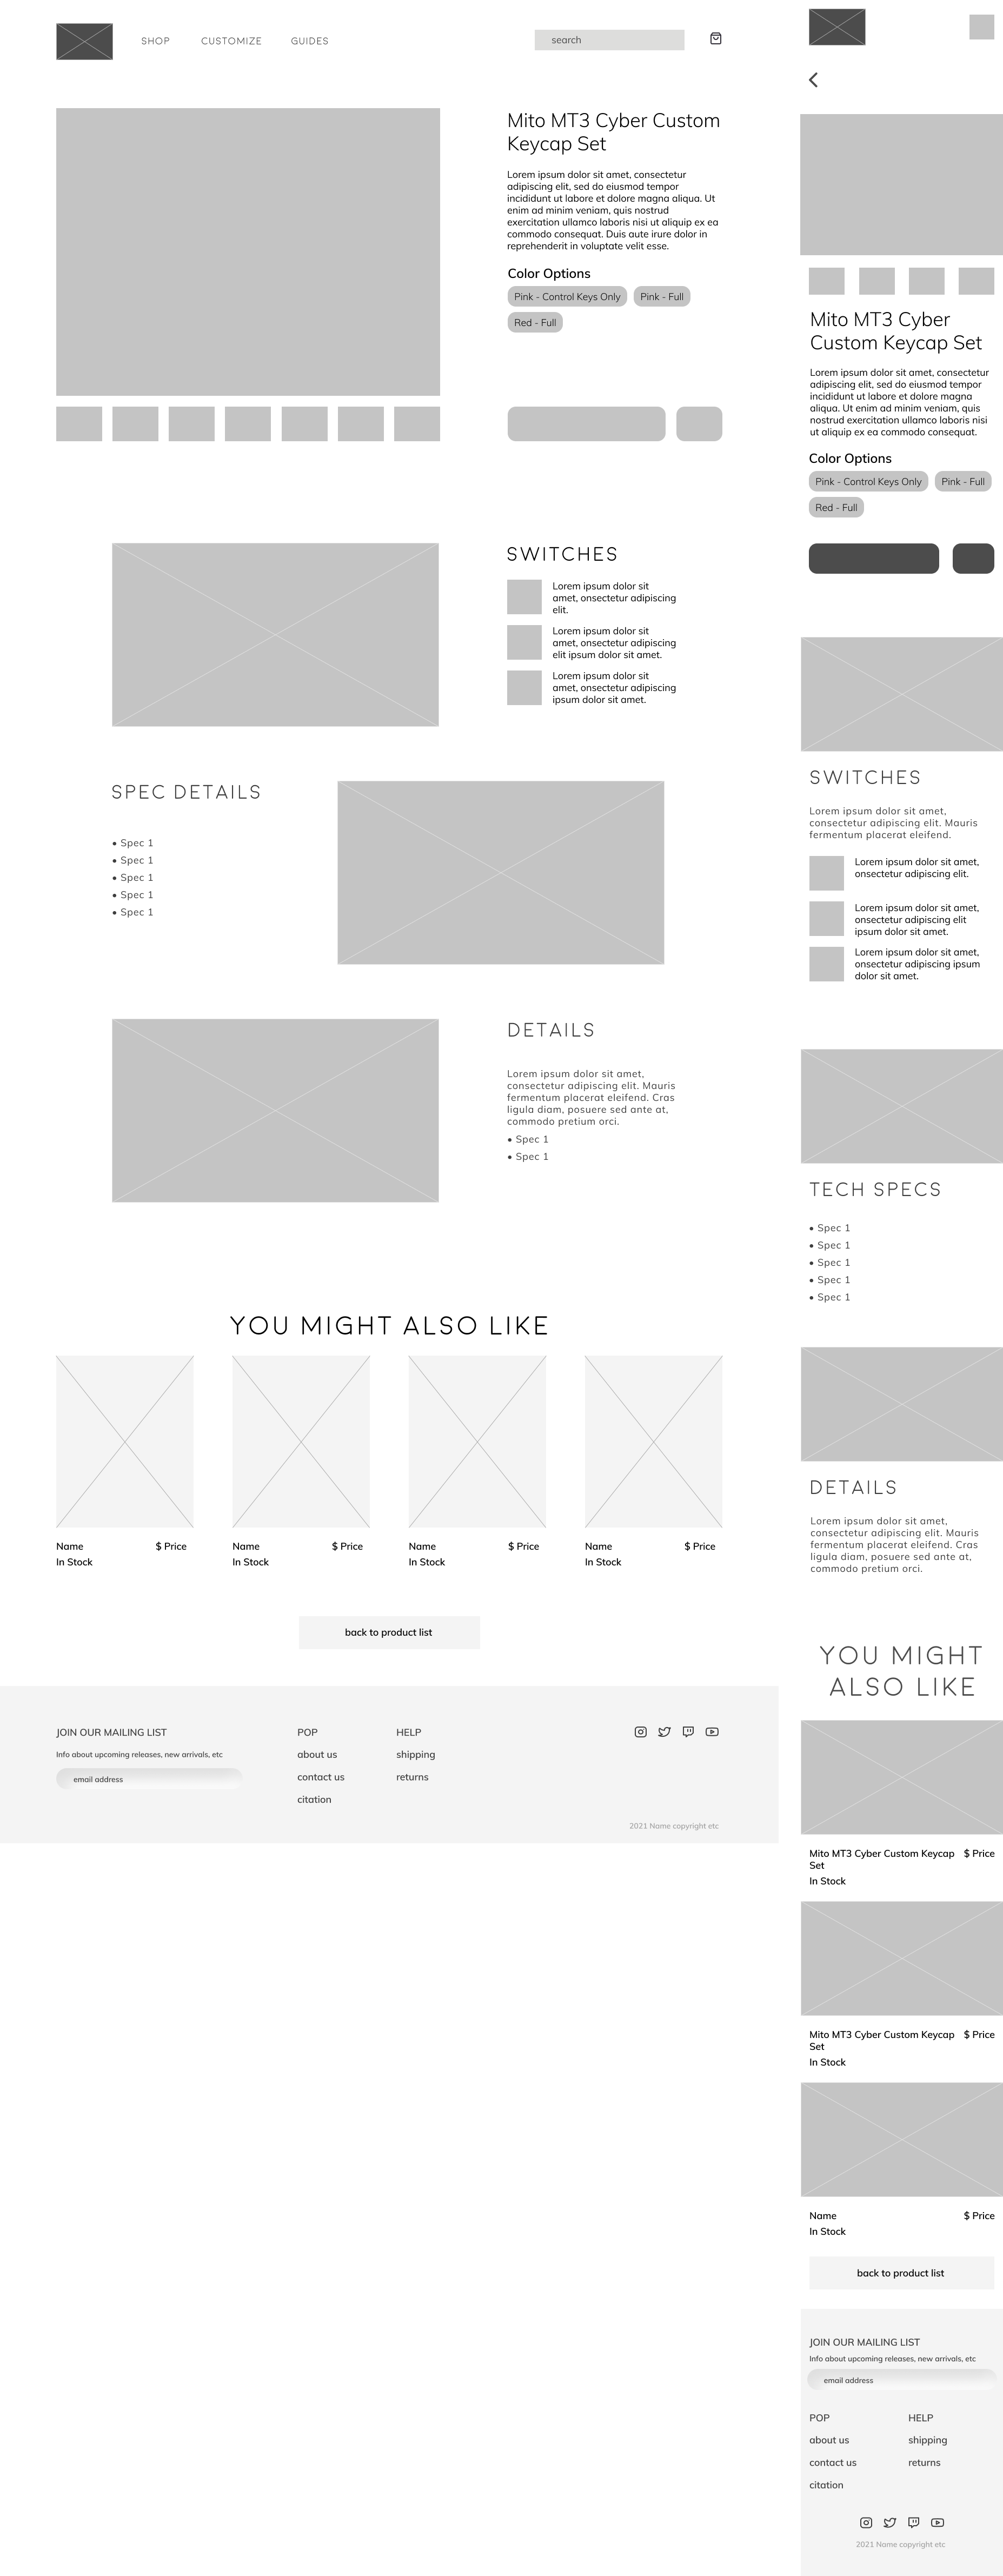 product detail page wireframe